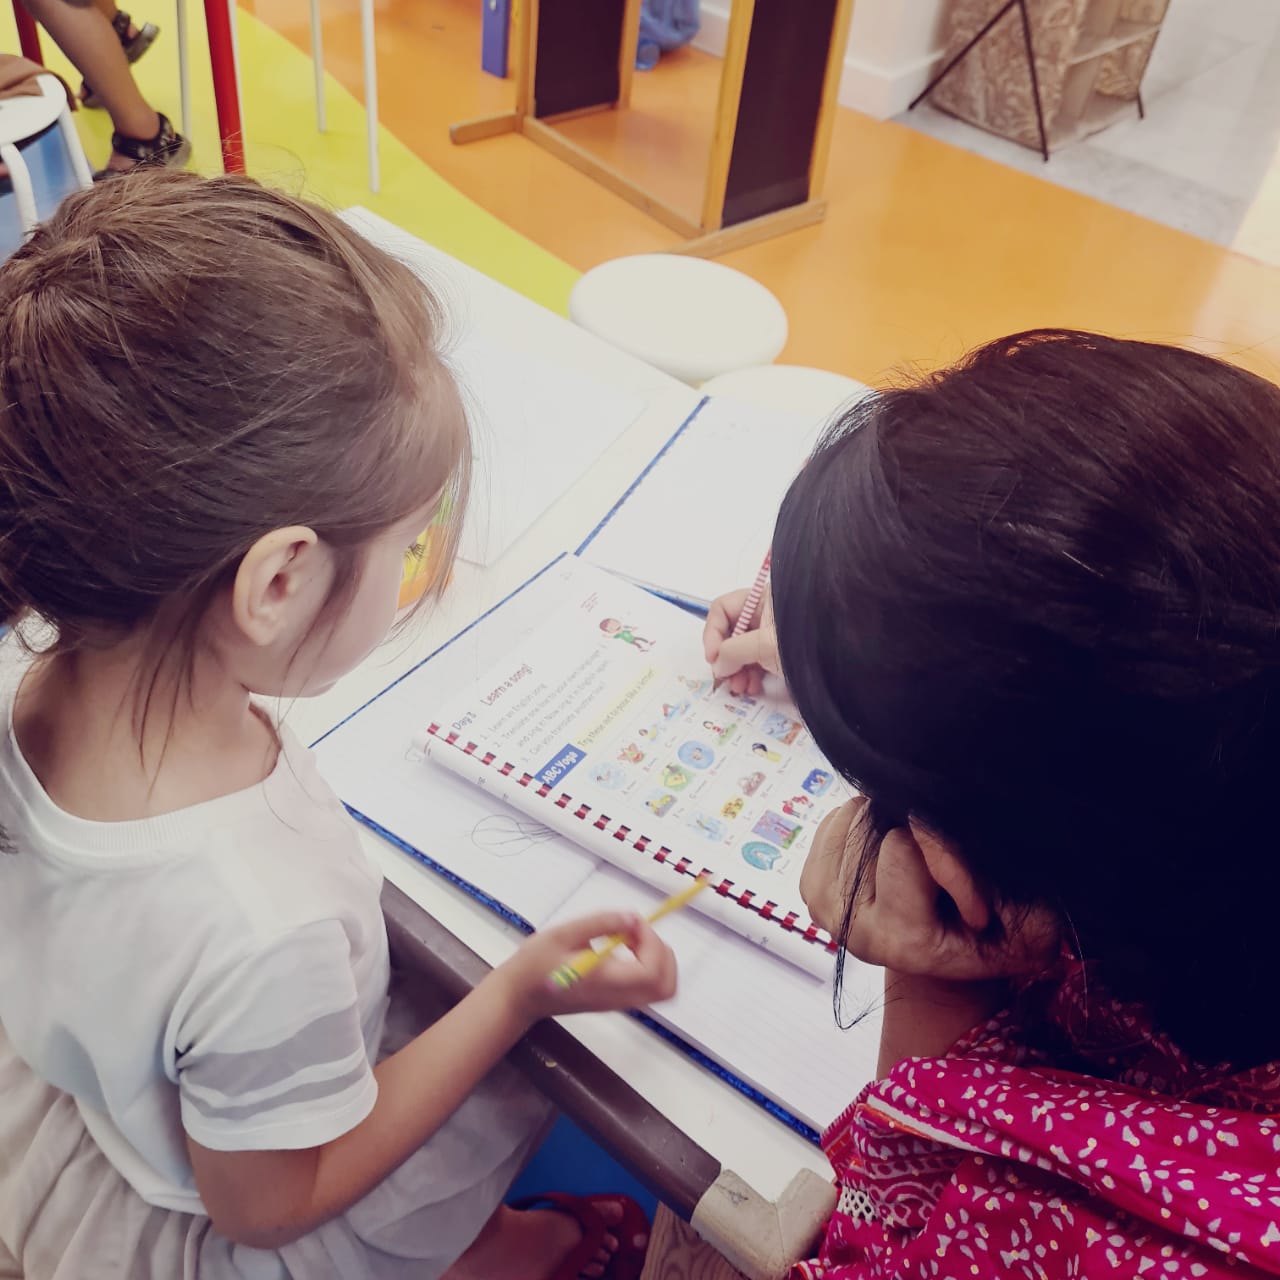 Newly refugeed Afghan children in Qatar are benefitting from Social Emotional Learning activities included in the specially tailored Emergency Education Packages